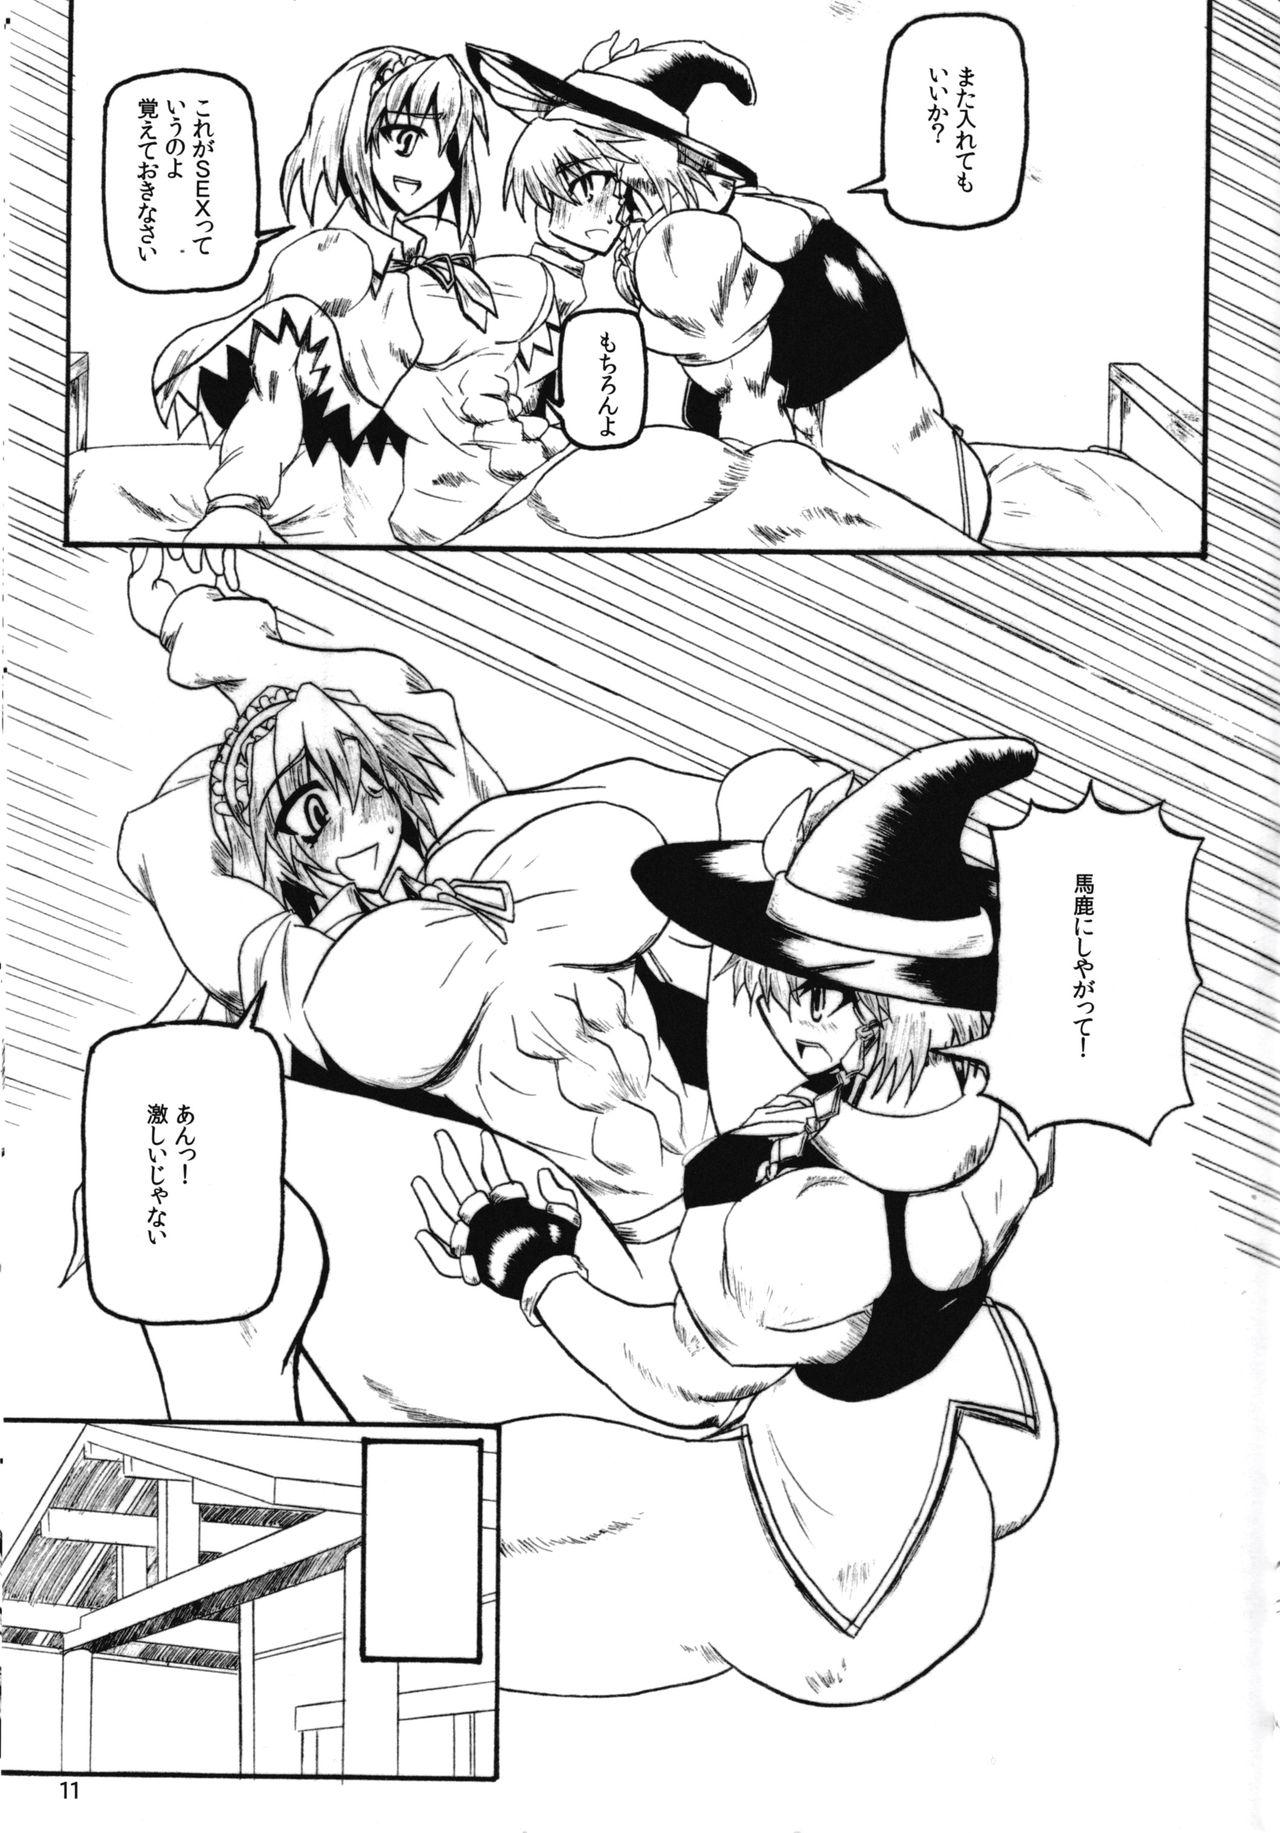 Ex Girlfriends Exceeds Power of Human2 - Touhou project Moms - Page 11